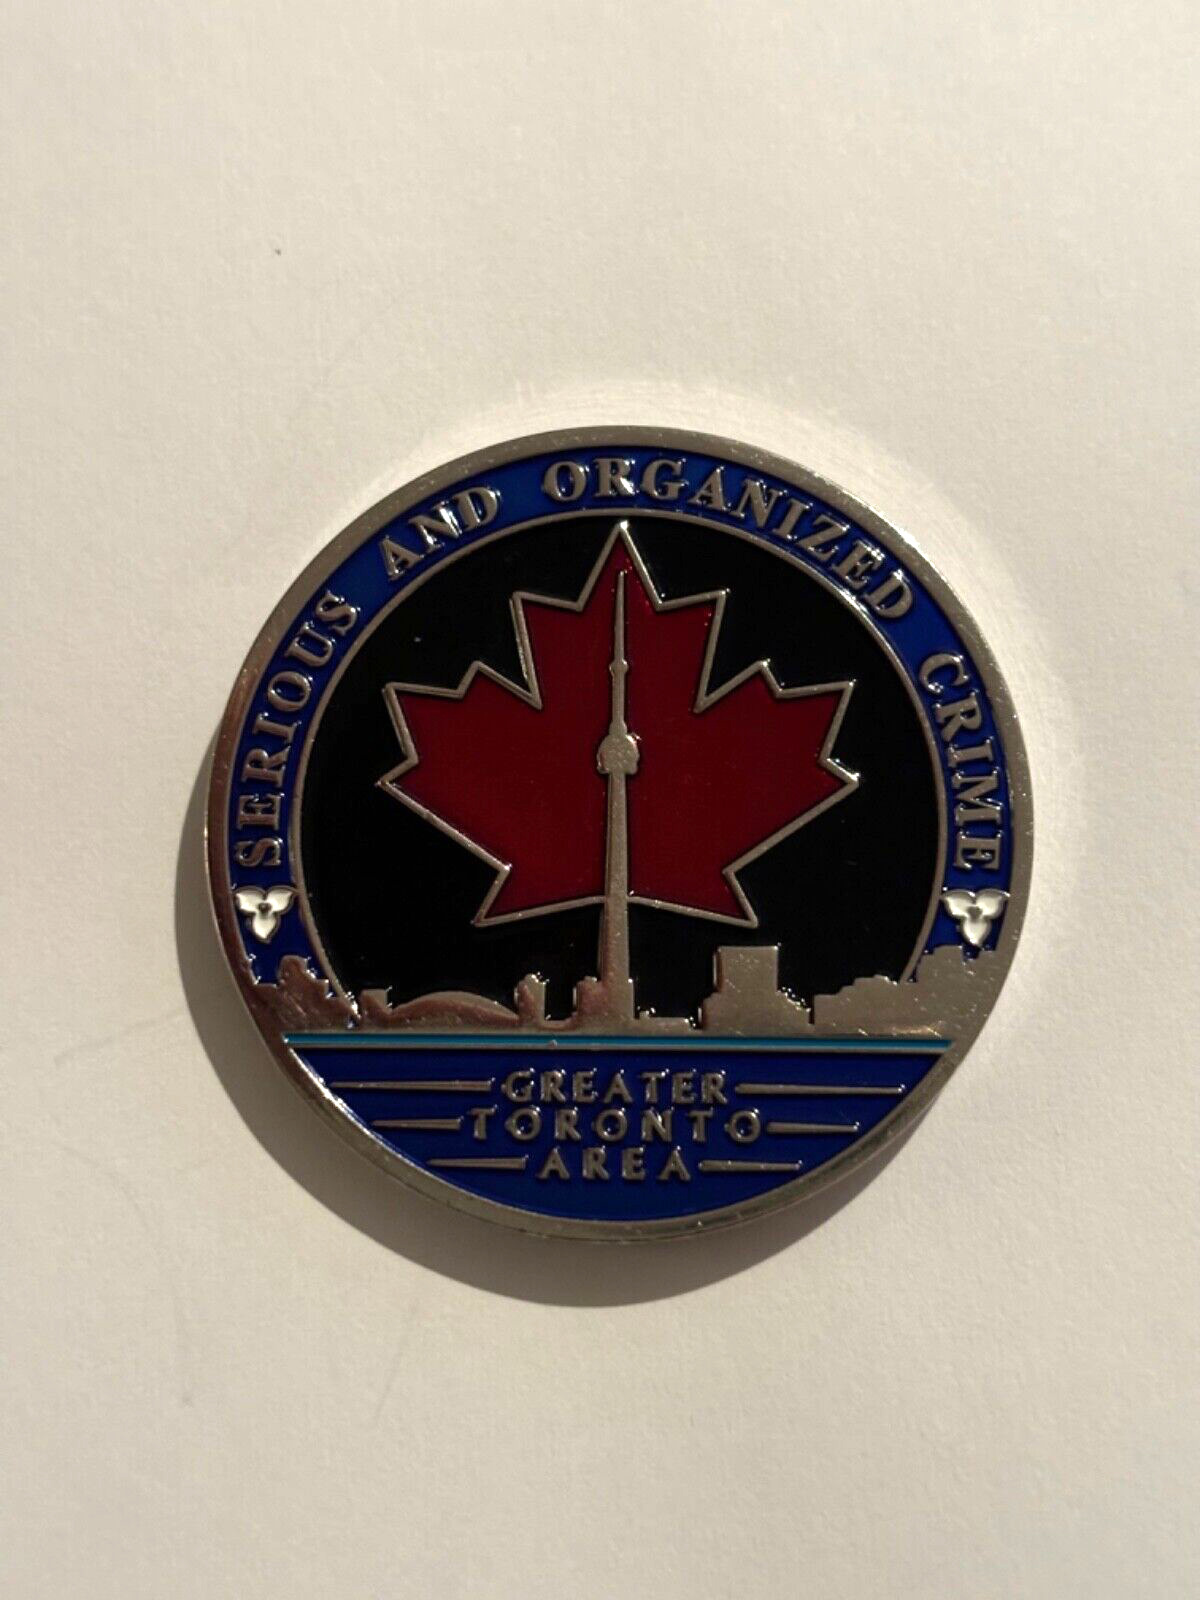 RCMP \'O\' Div Challenge Coin - Serious and Organized Crime